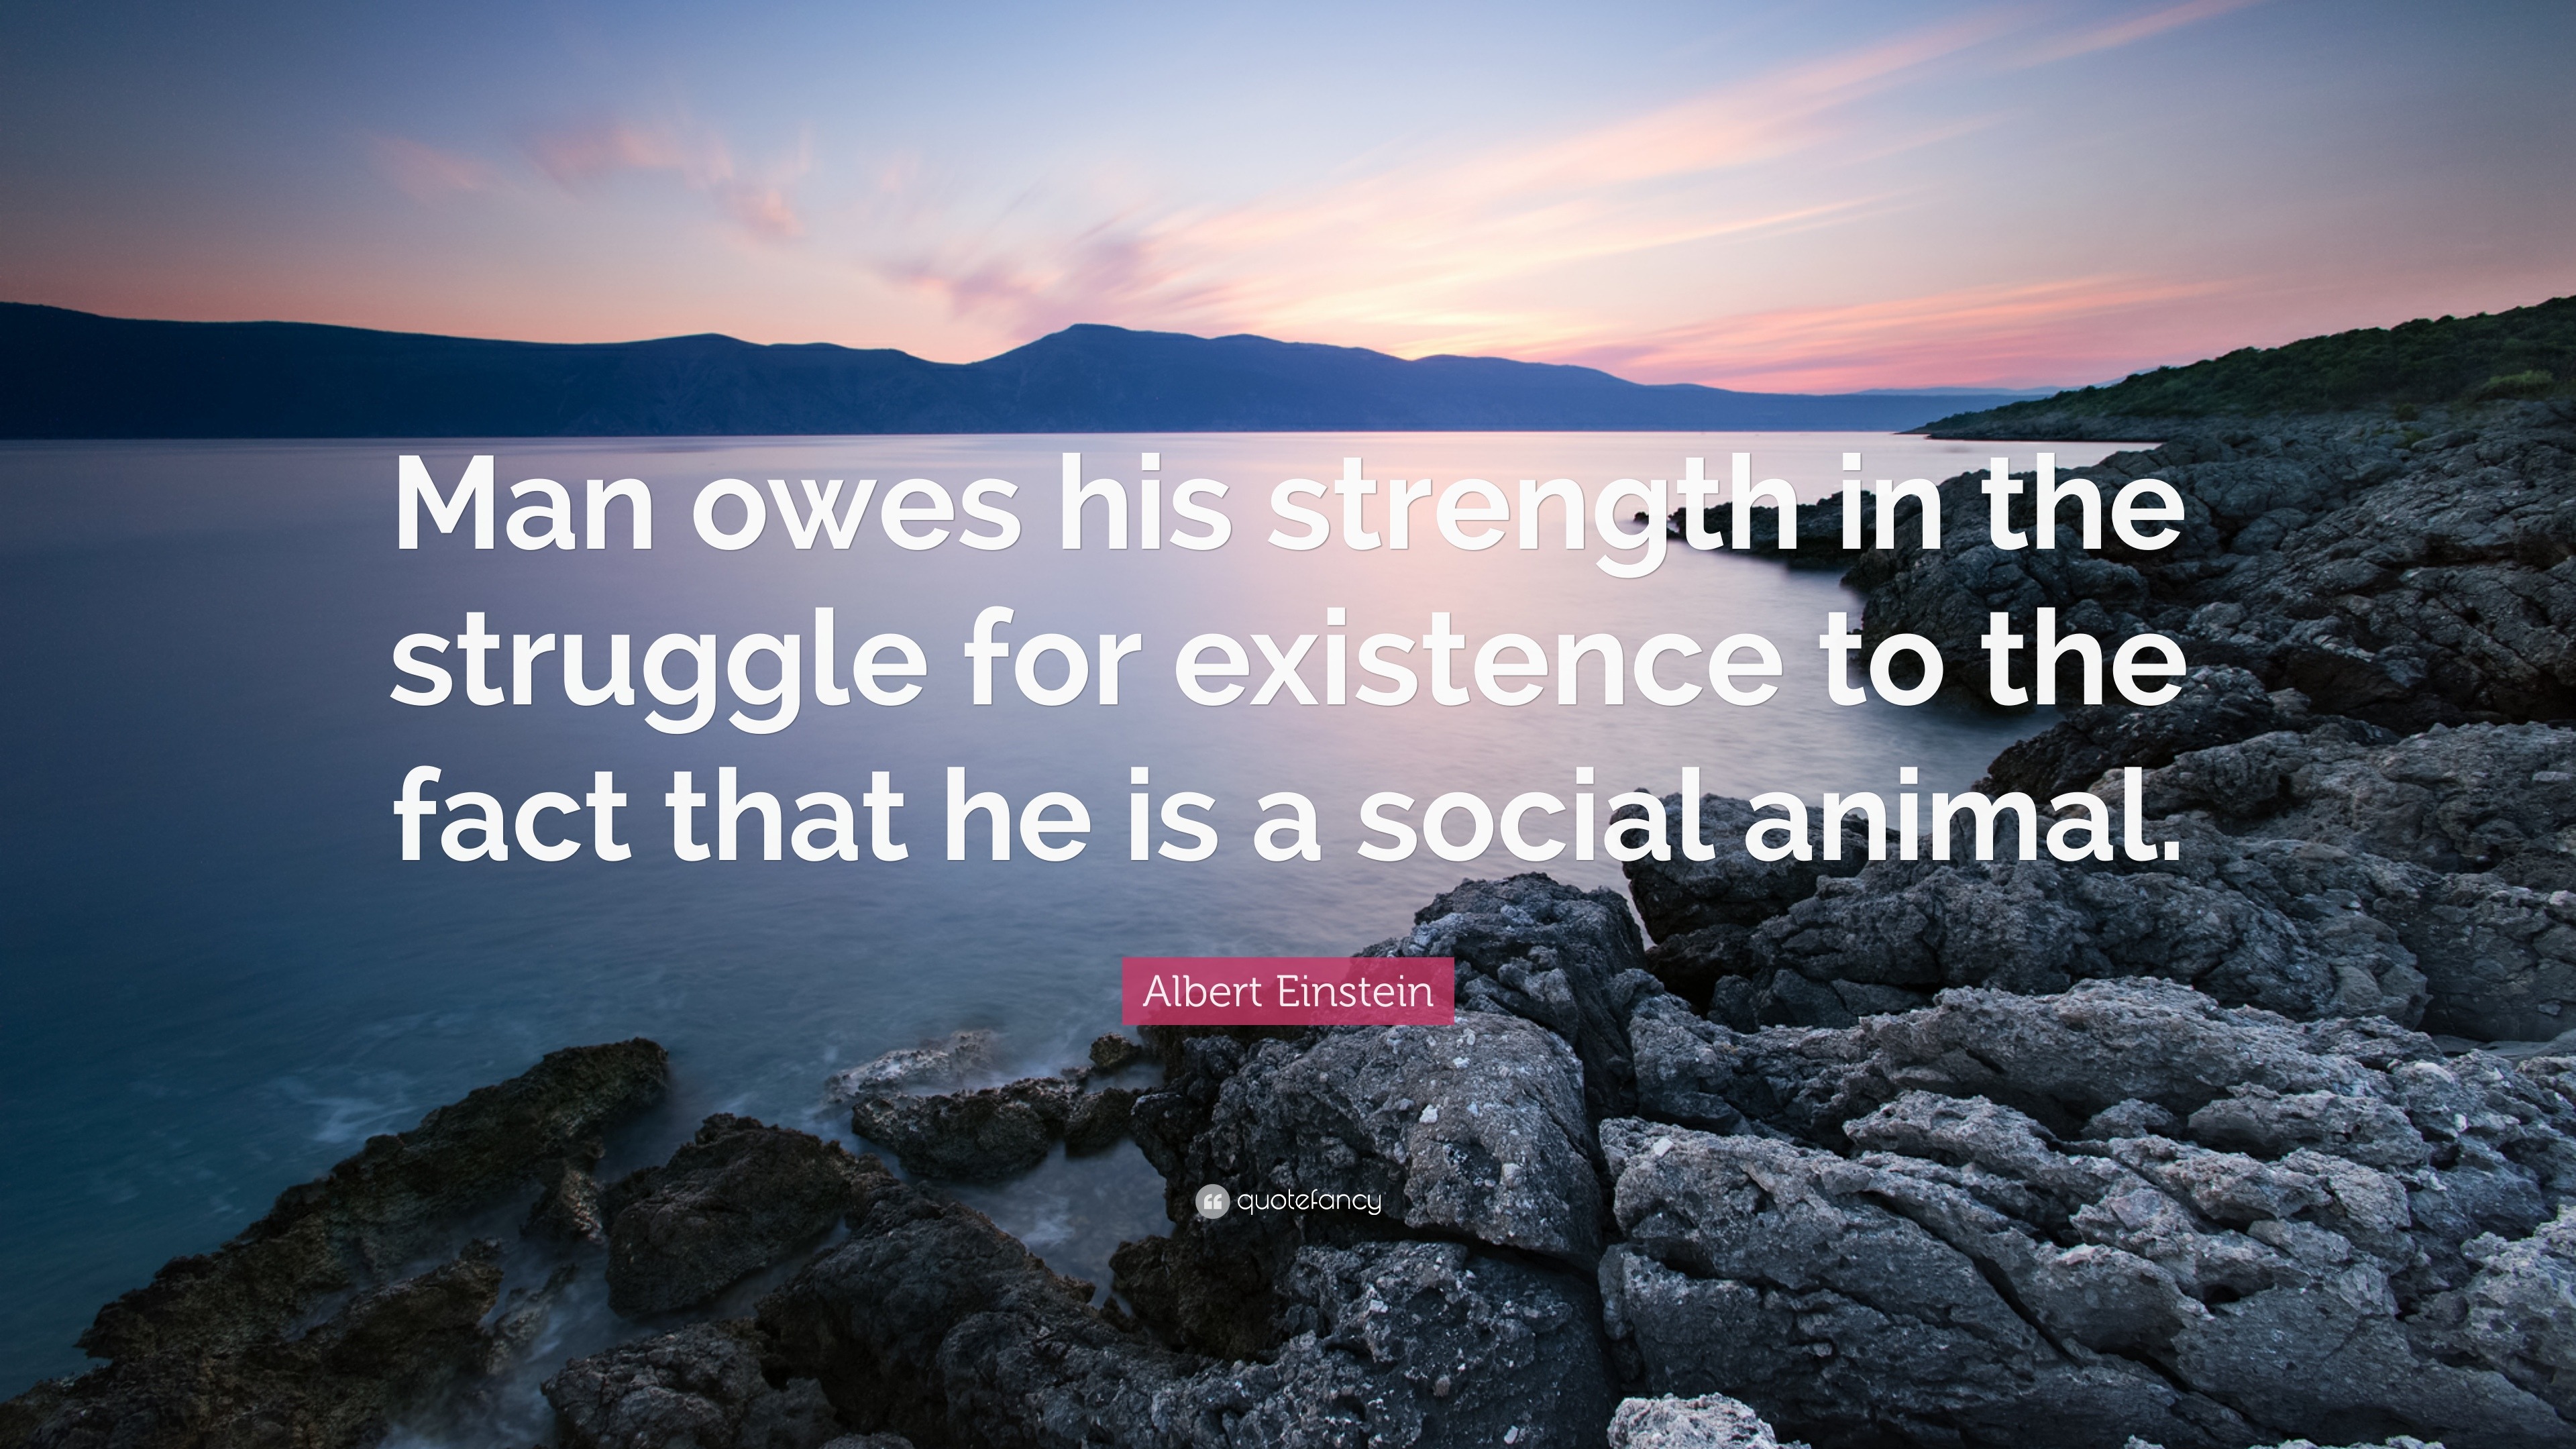 Albert Einstein Quote: “Man owes his strength in the struggle for existence  to the fact that